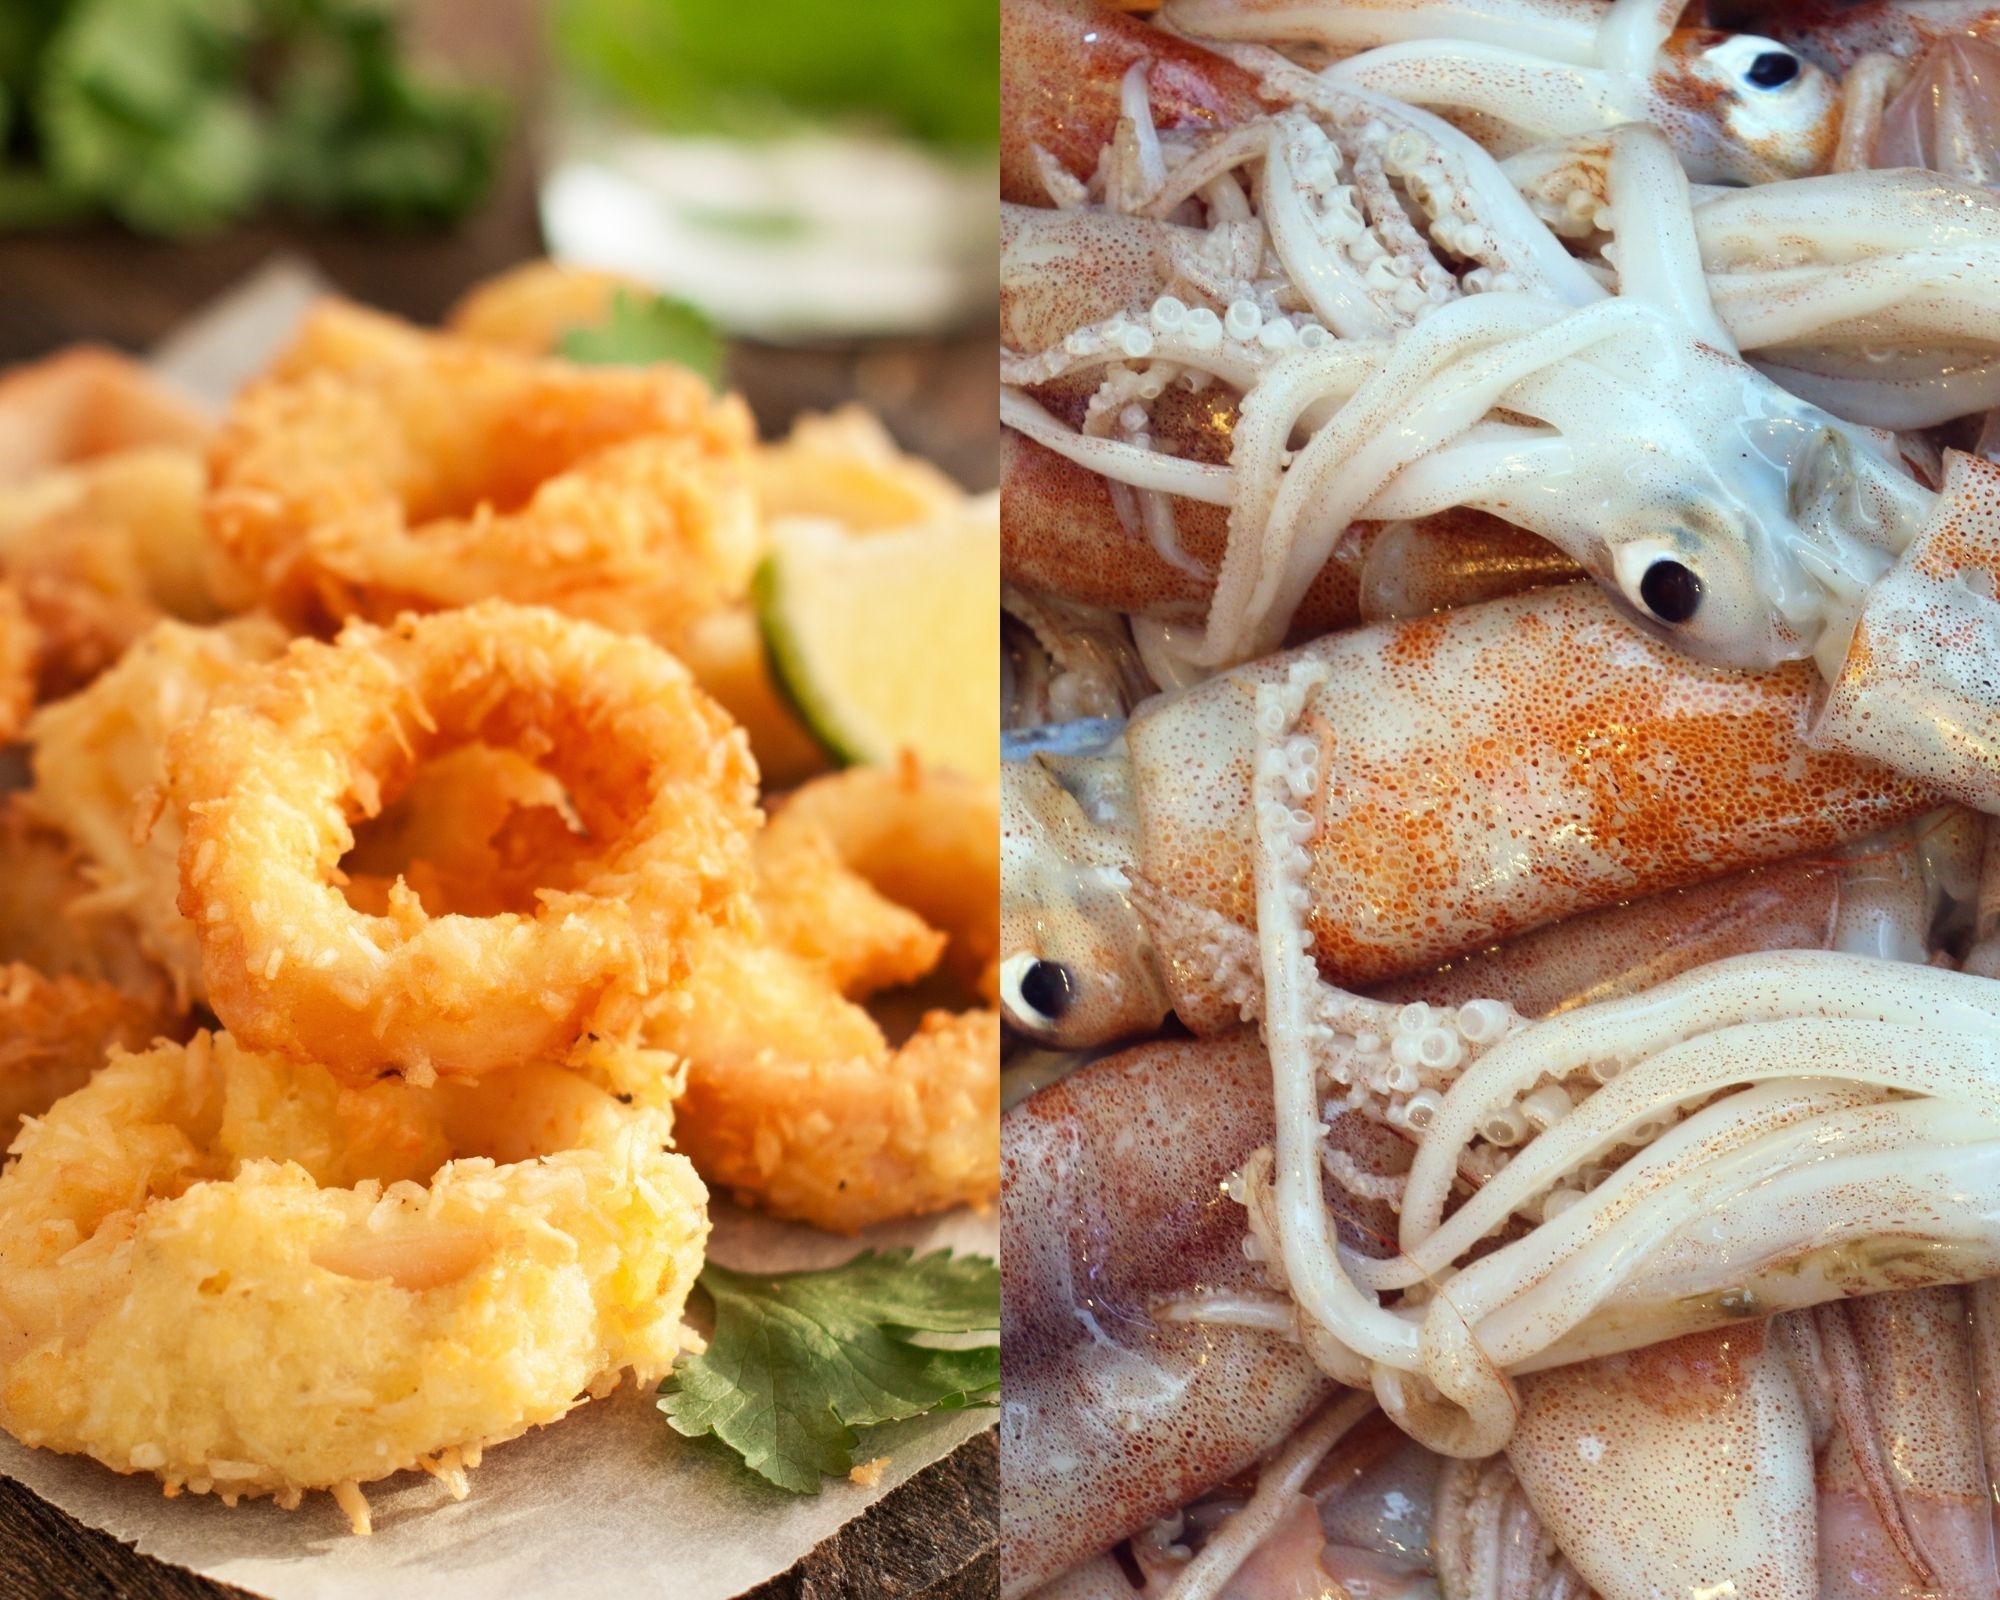 Squid Benefits, Nutrition Facts, And Potential Risks